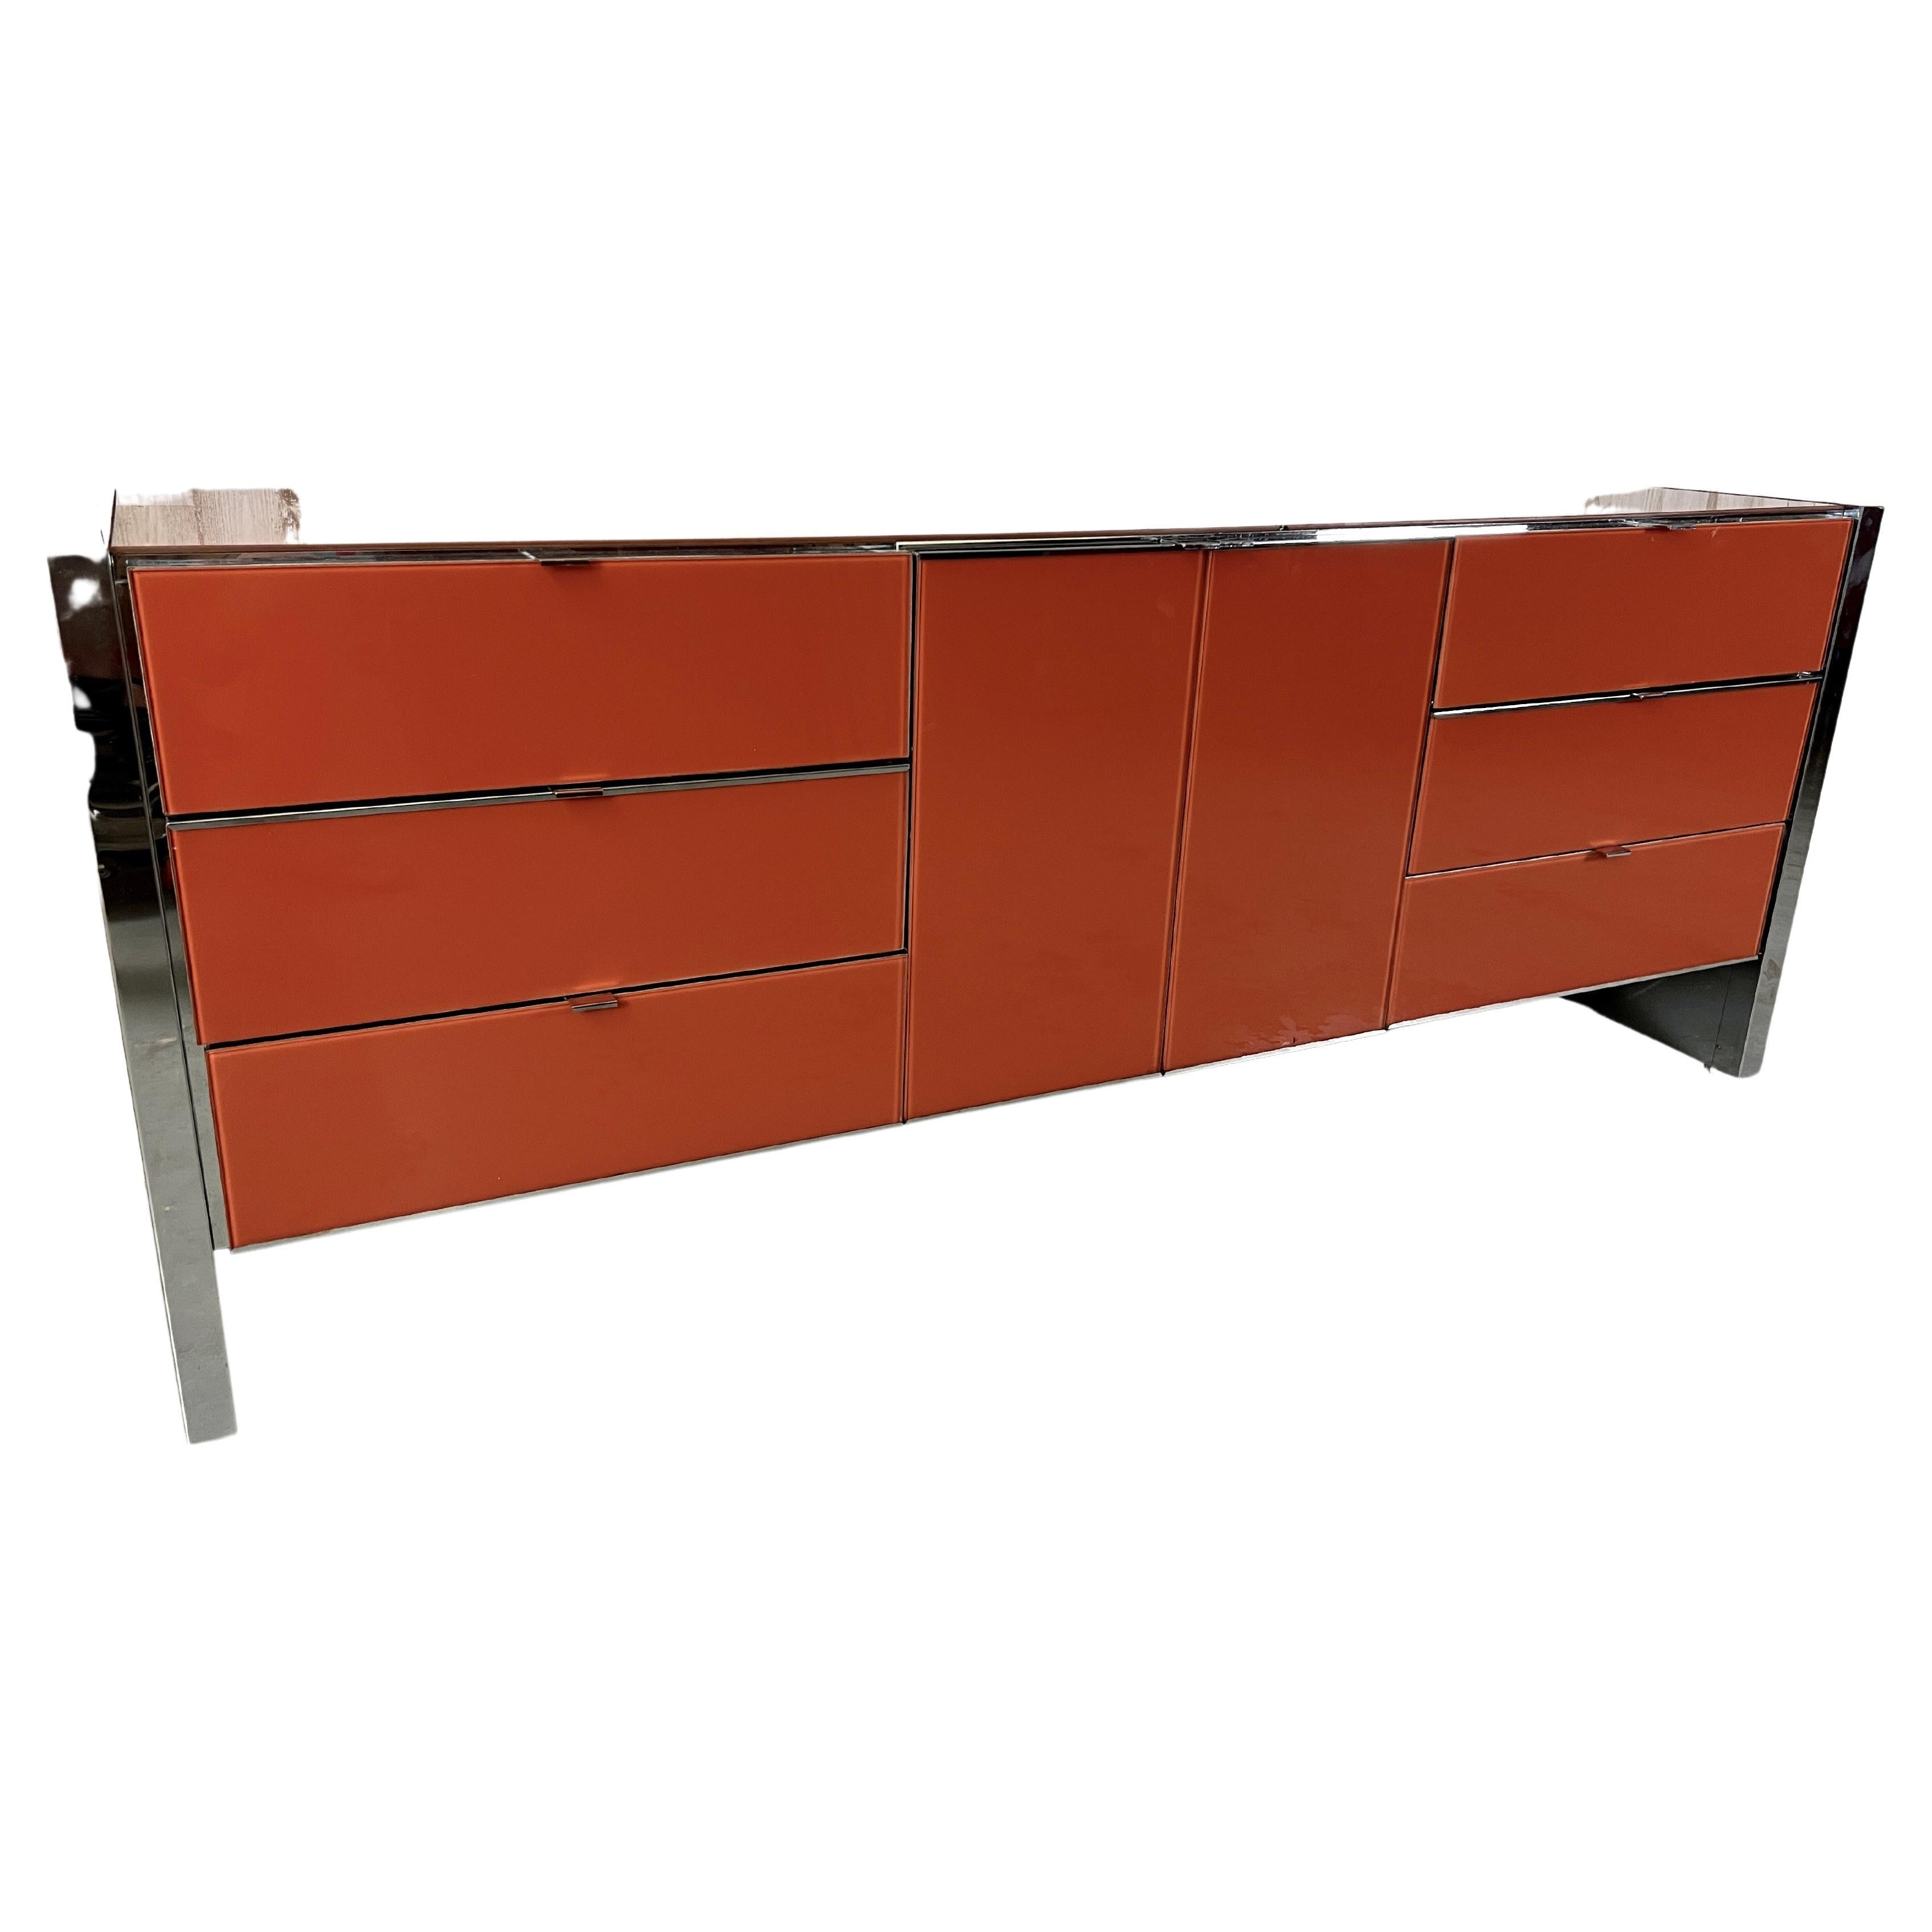 Ello Lacquered glass and chrome credenza. Burnt Orange lacquered glass with chrome sides, trim, and handles.